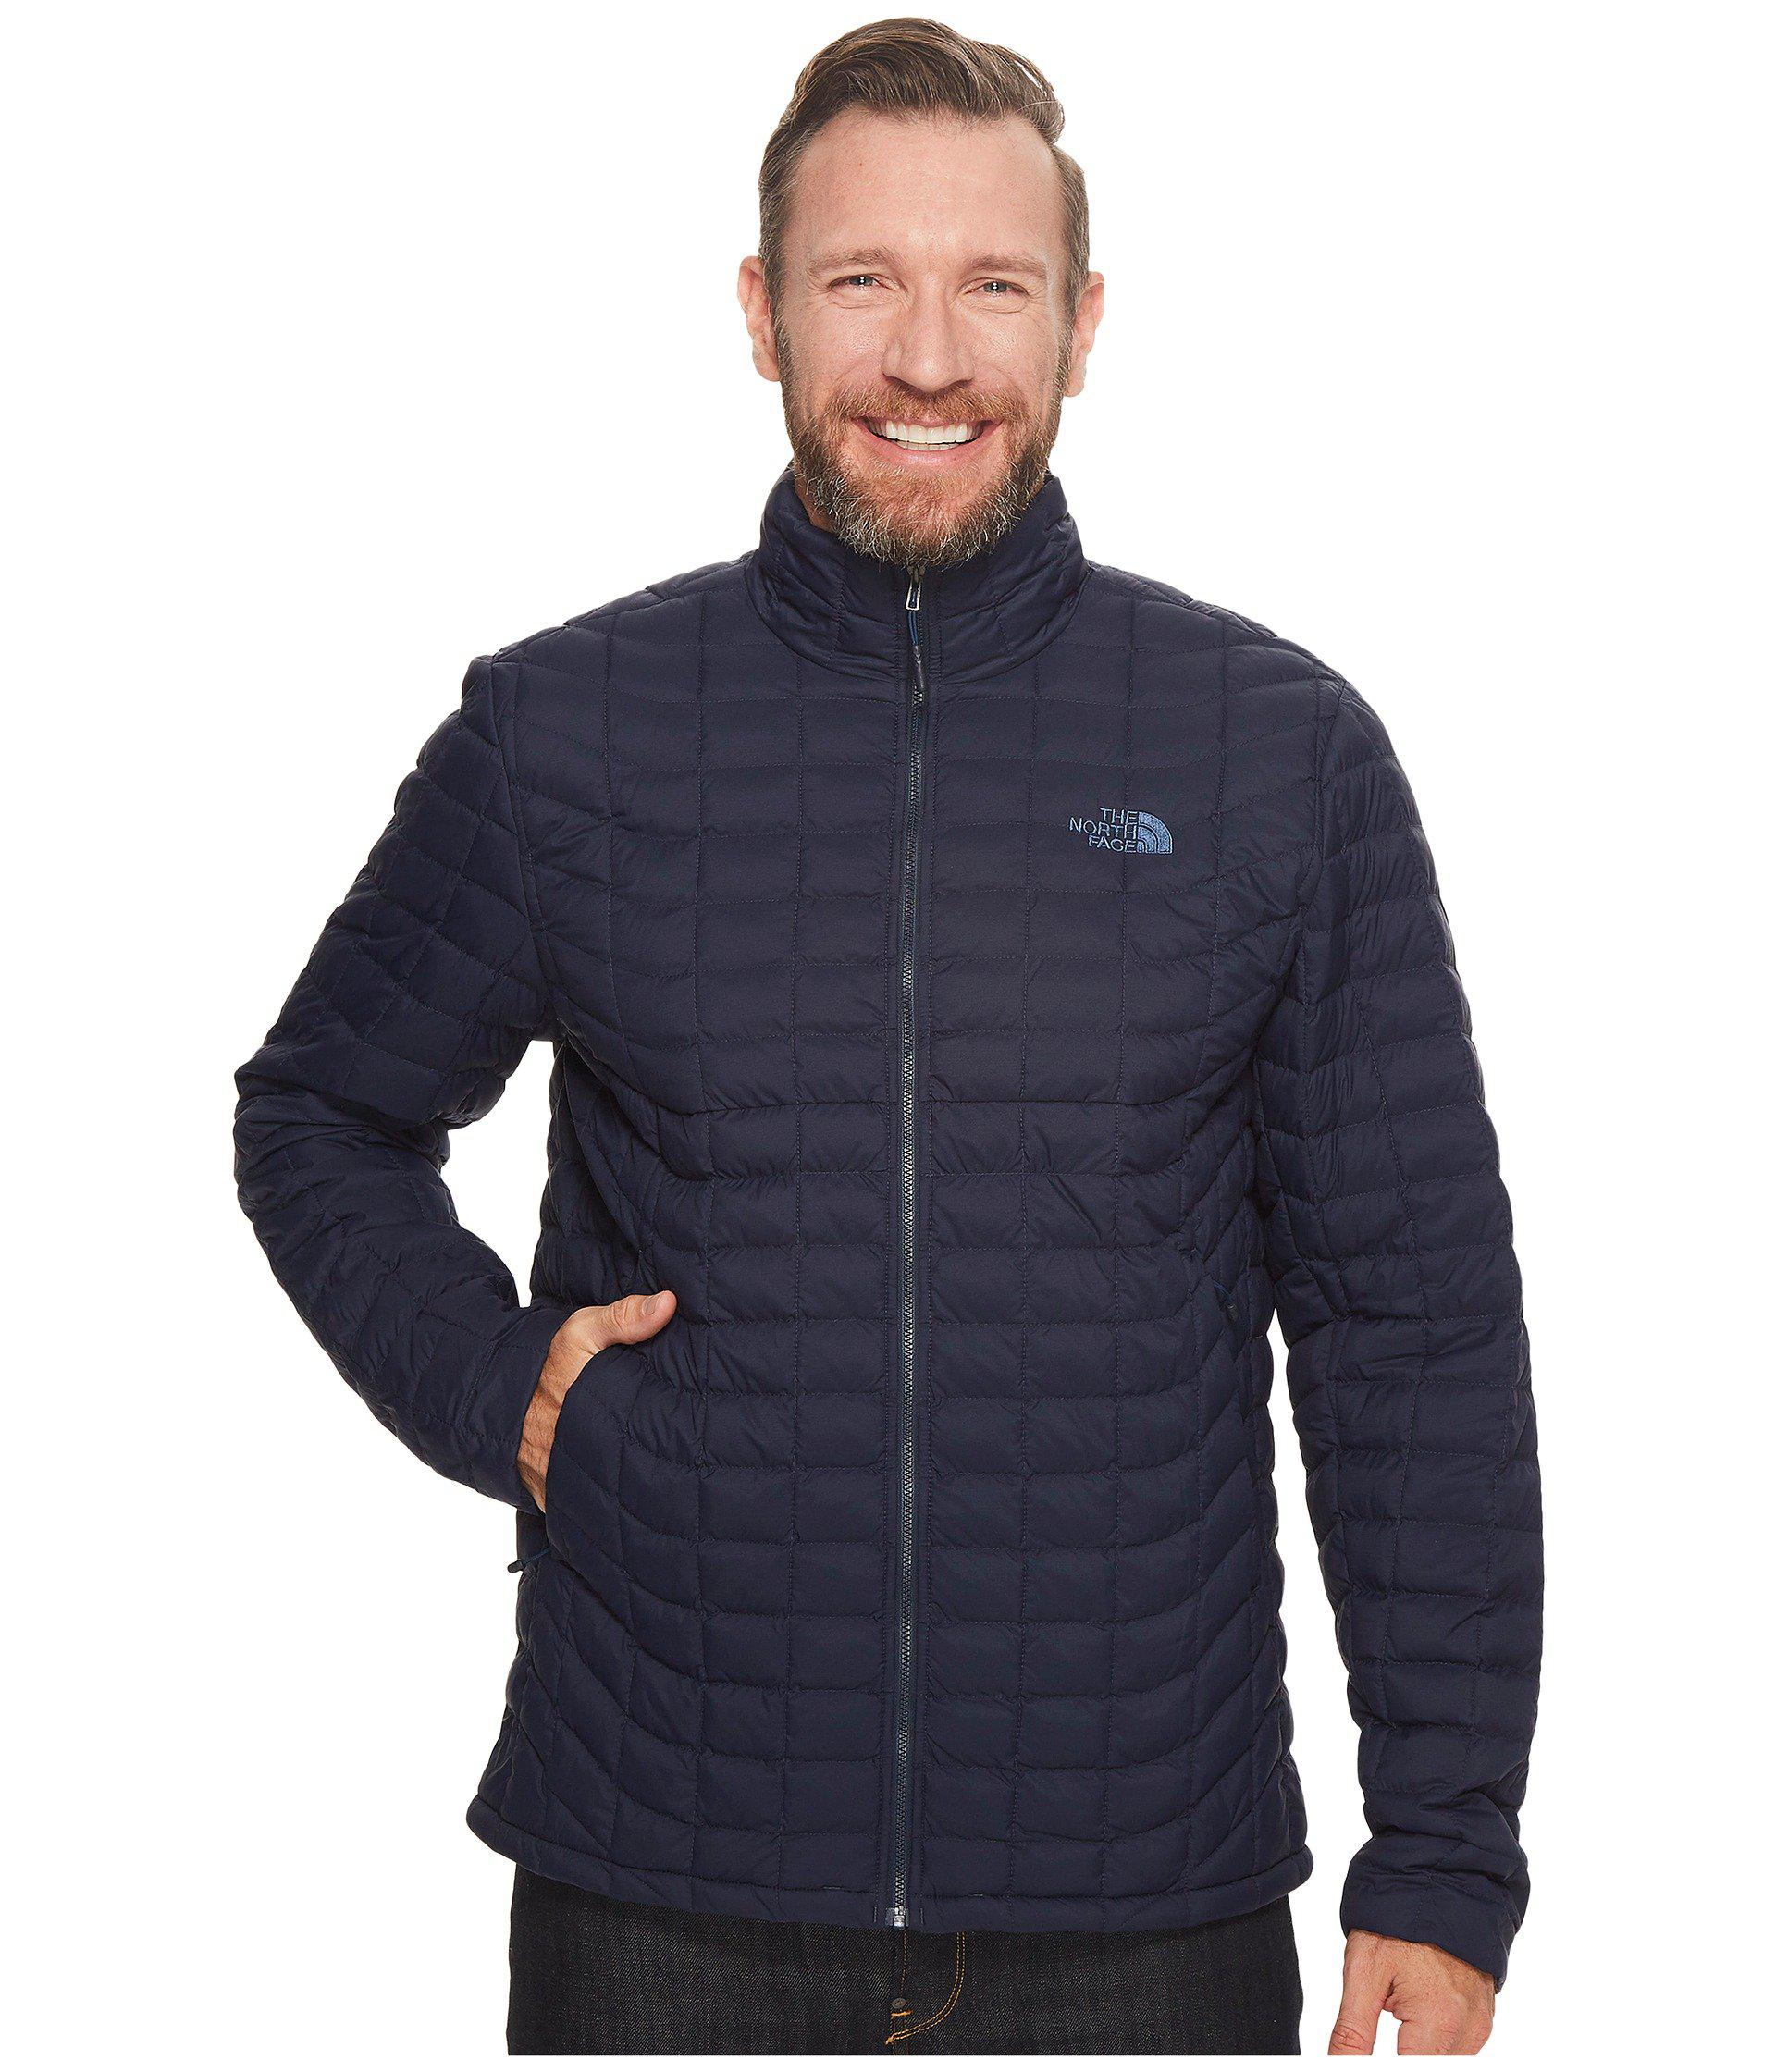 the north face sherpa thermoball jacket